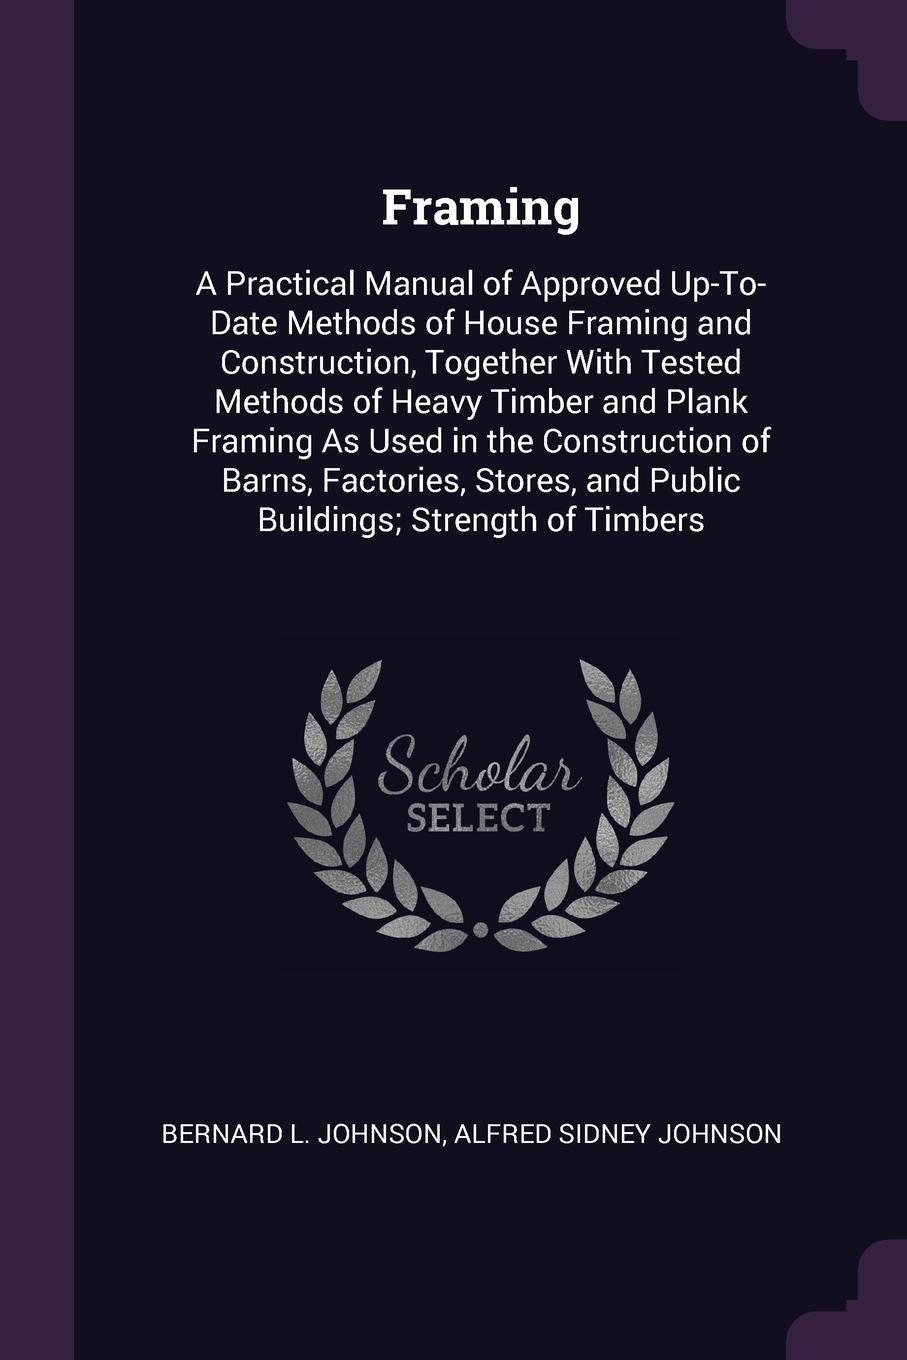 Framing. A Practical Manual of Approved Up-To-Date Methods of House Framing and Construction, Together With Tested Methods of Heavy Timber and Plank Framing As Used in the Construction of Barns, Factories, Stores, and Public Buildings; Strength of...